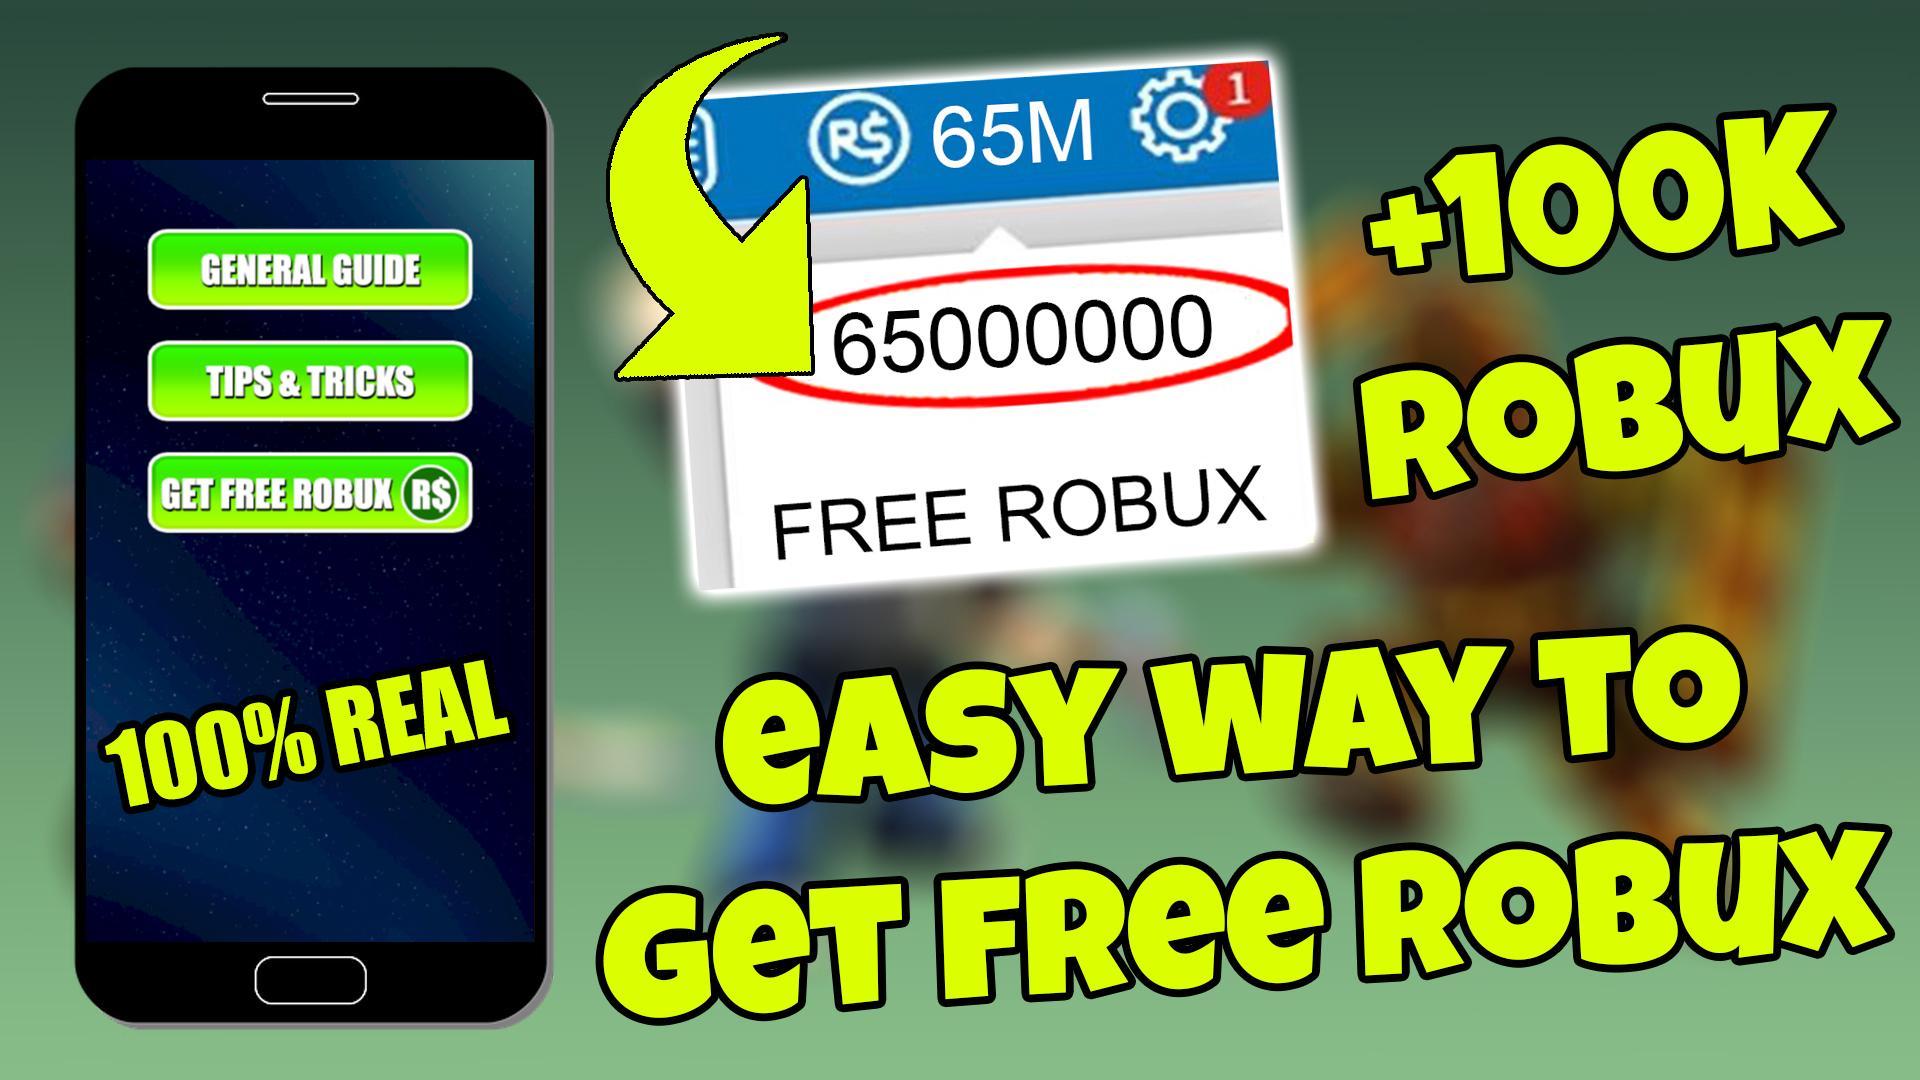 How To Get Free Robux Easy Real - real ways to get free robux